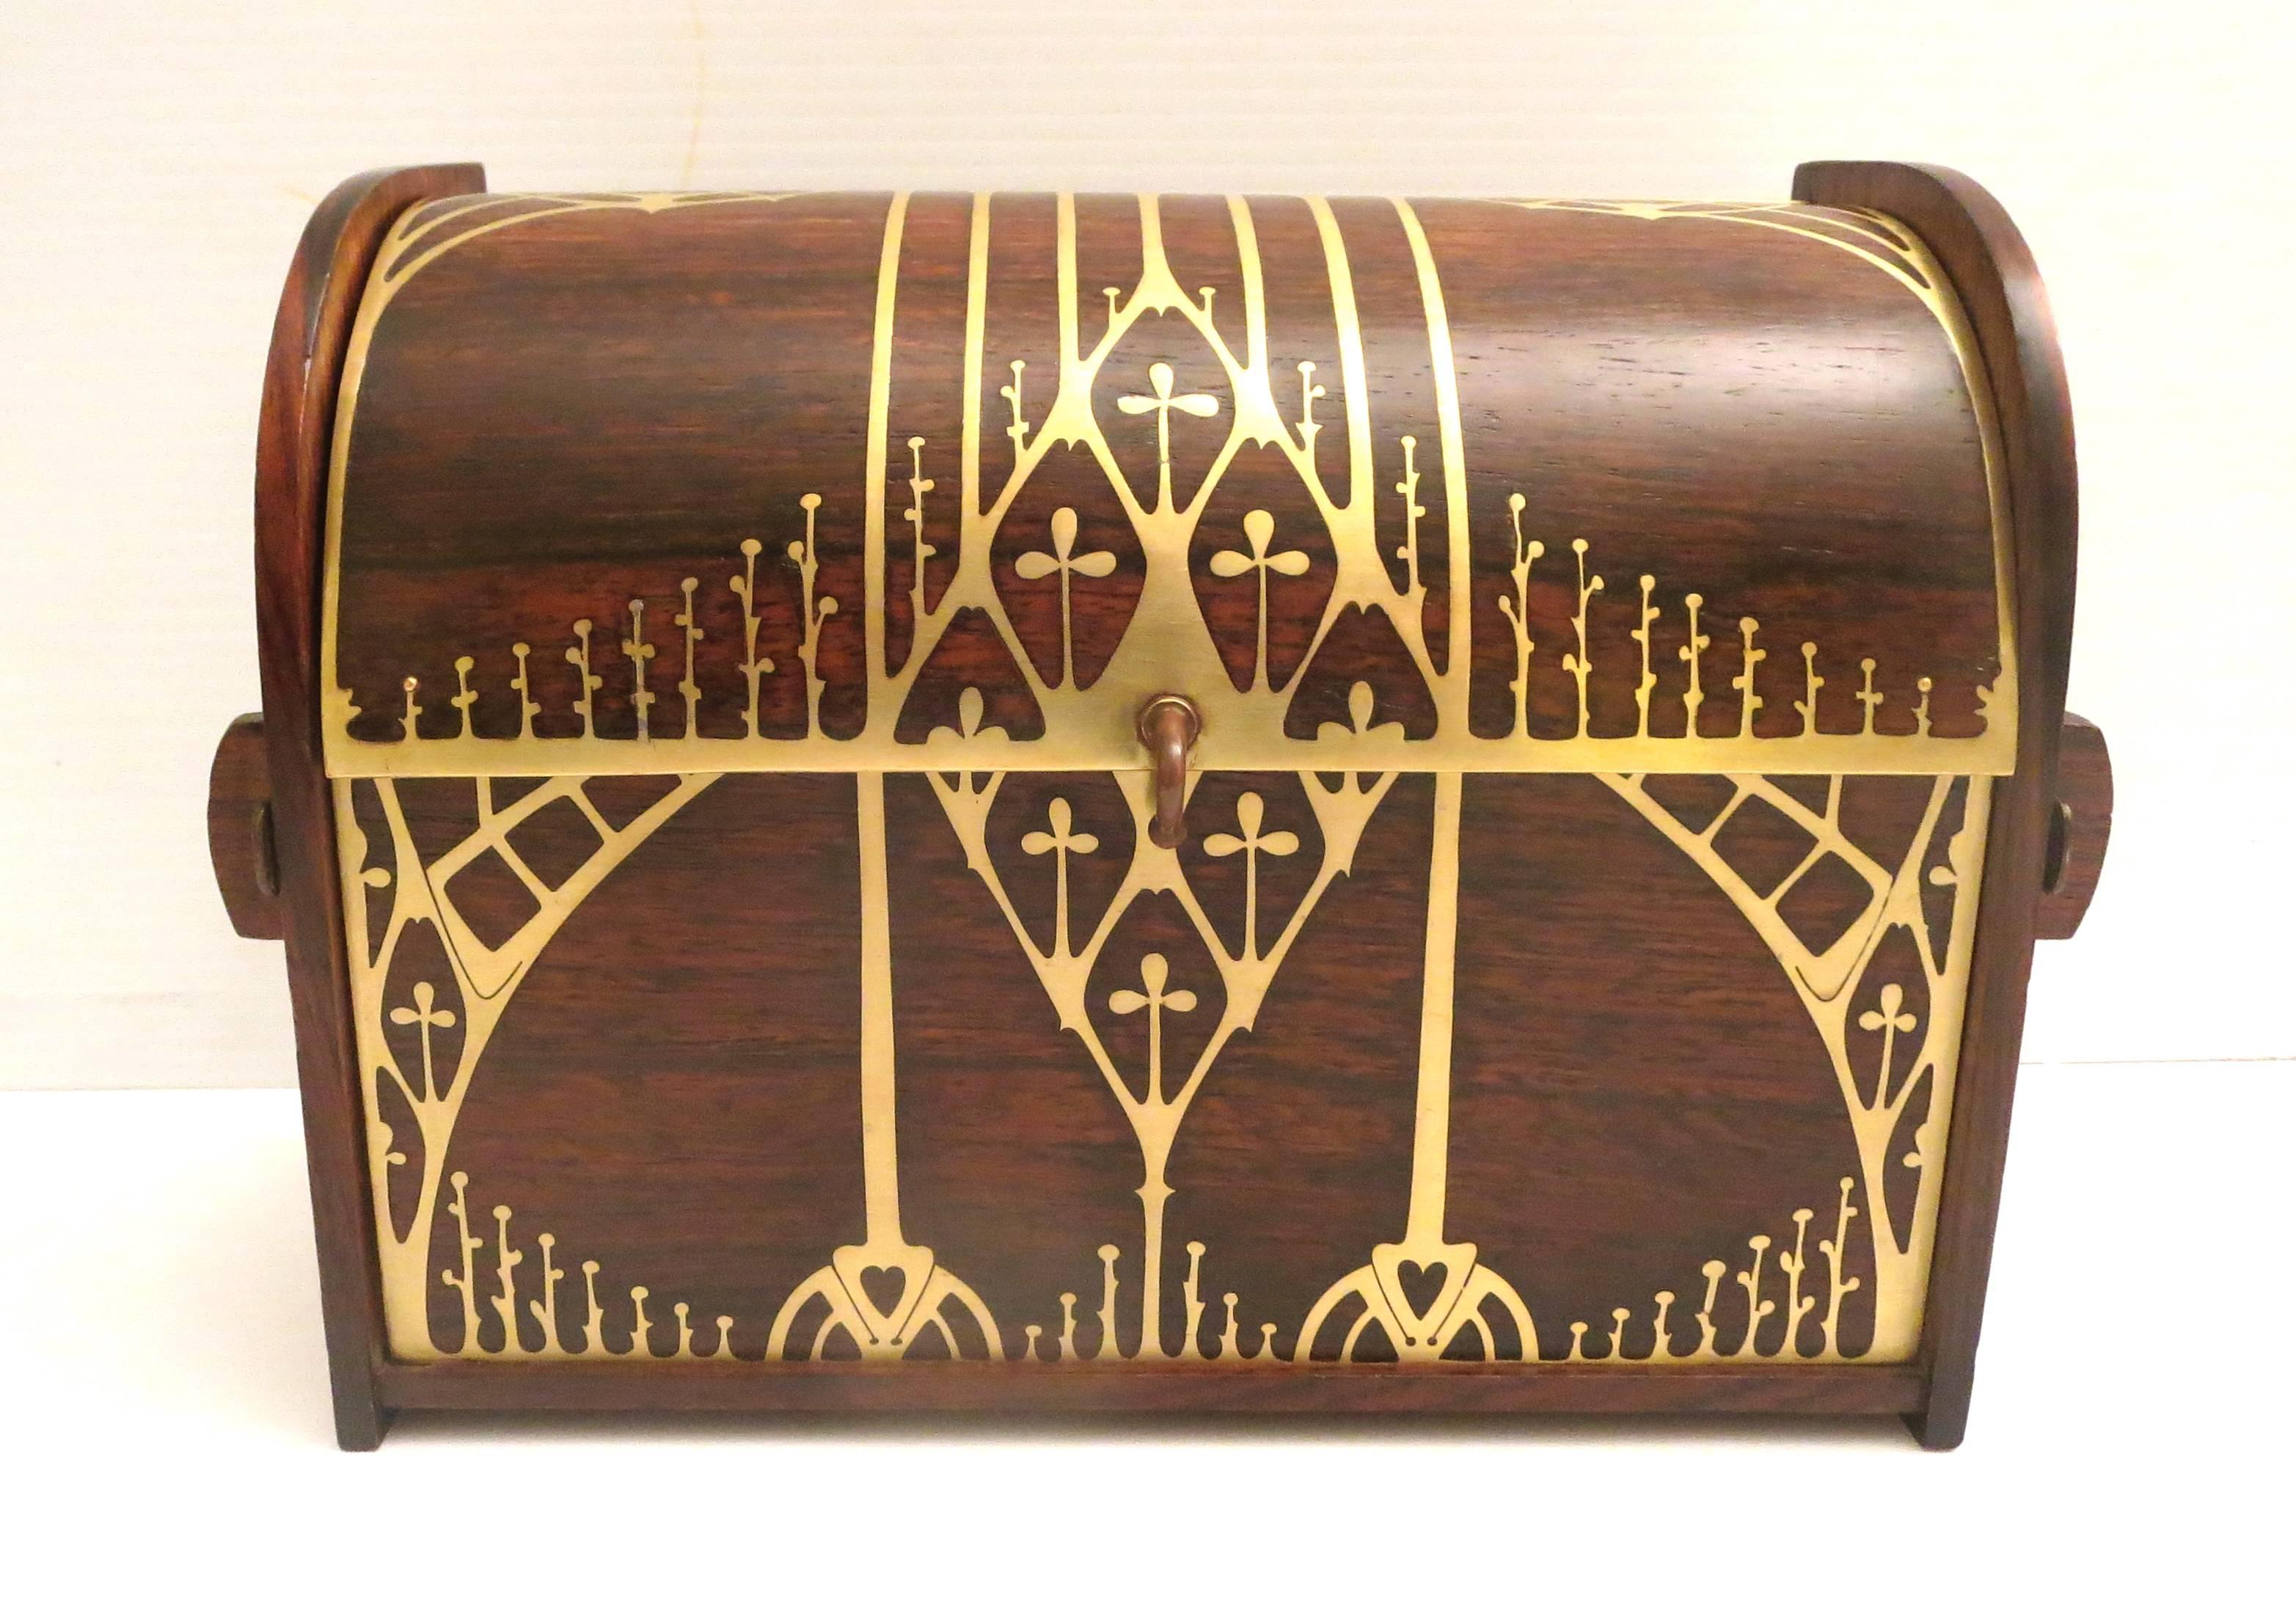 An Art Nouveau writing box crafted with palisander (rosewood) and brass decoration. Domed lid on a high quality, hinge opens to reveal two compartments separated by a brass removable divider, with silk top inlaid and copper decorations on the side a